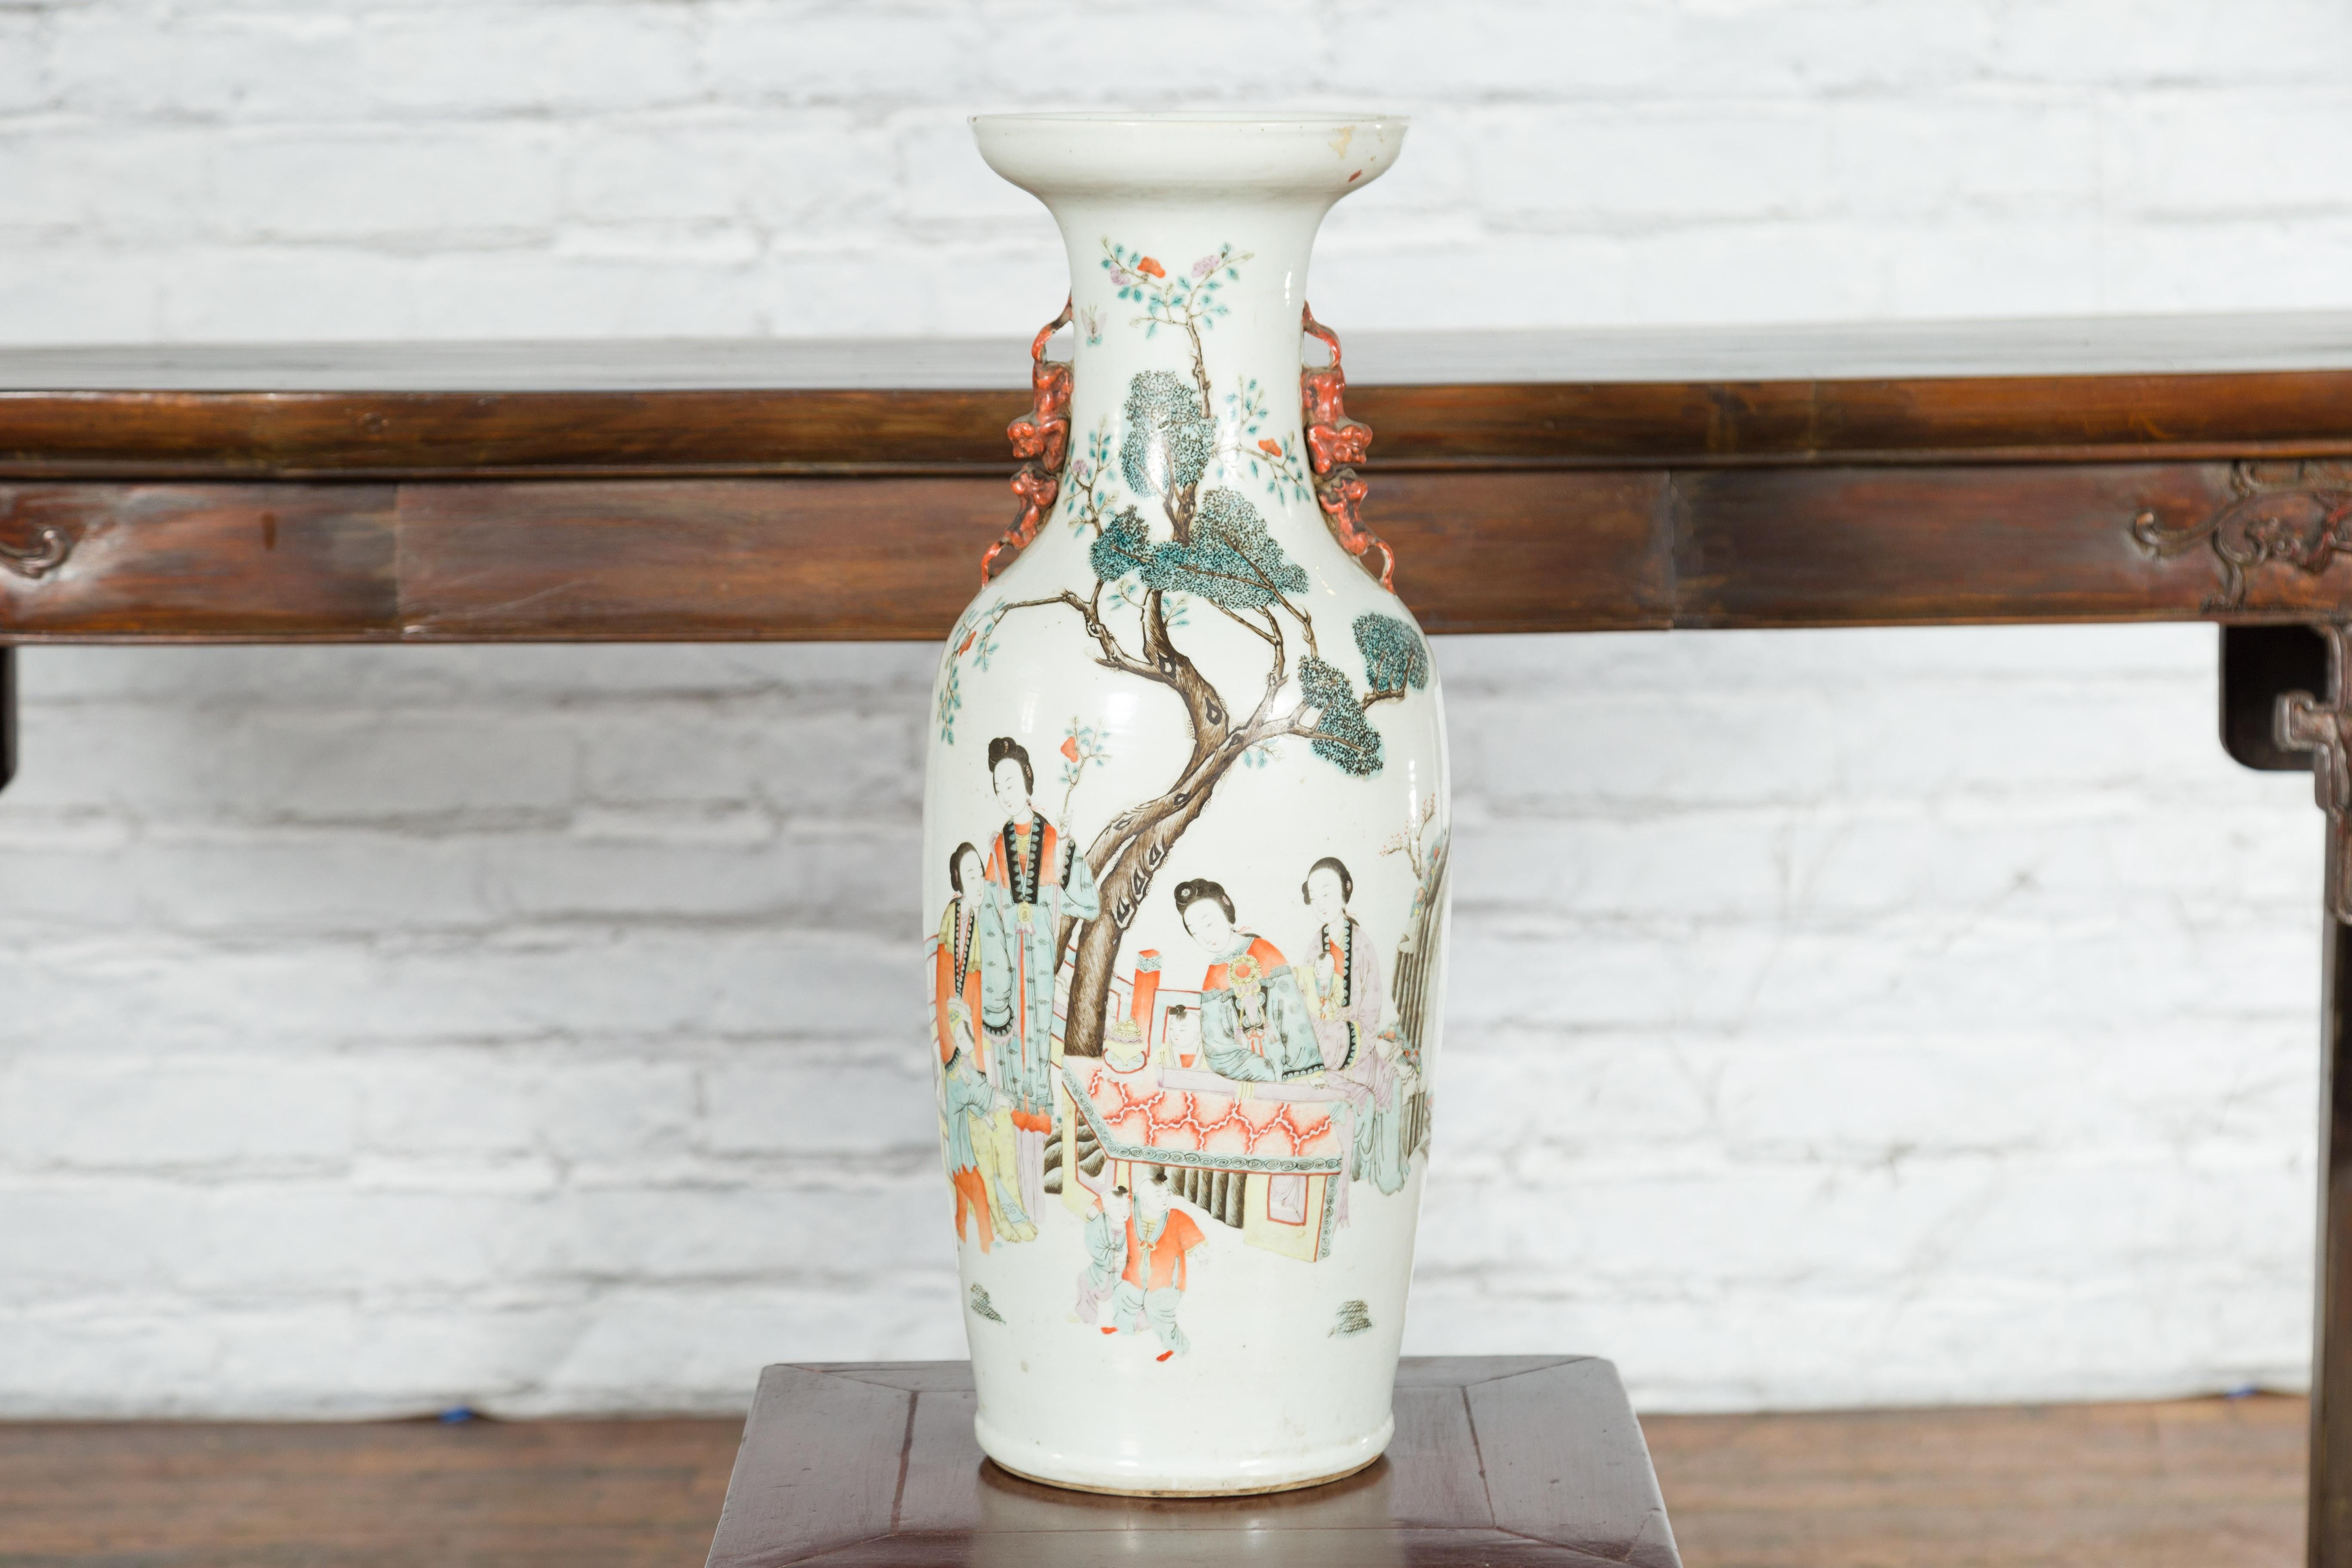 19th Century Chinese Qing Porcelain Vase with Hand-Painted Figures and Calligraphy Motifs For Sale